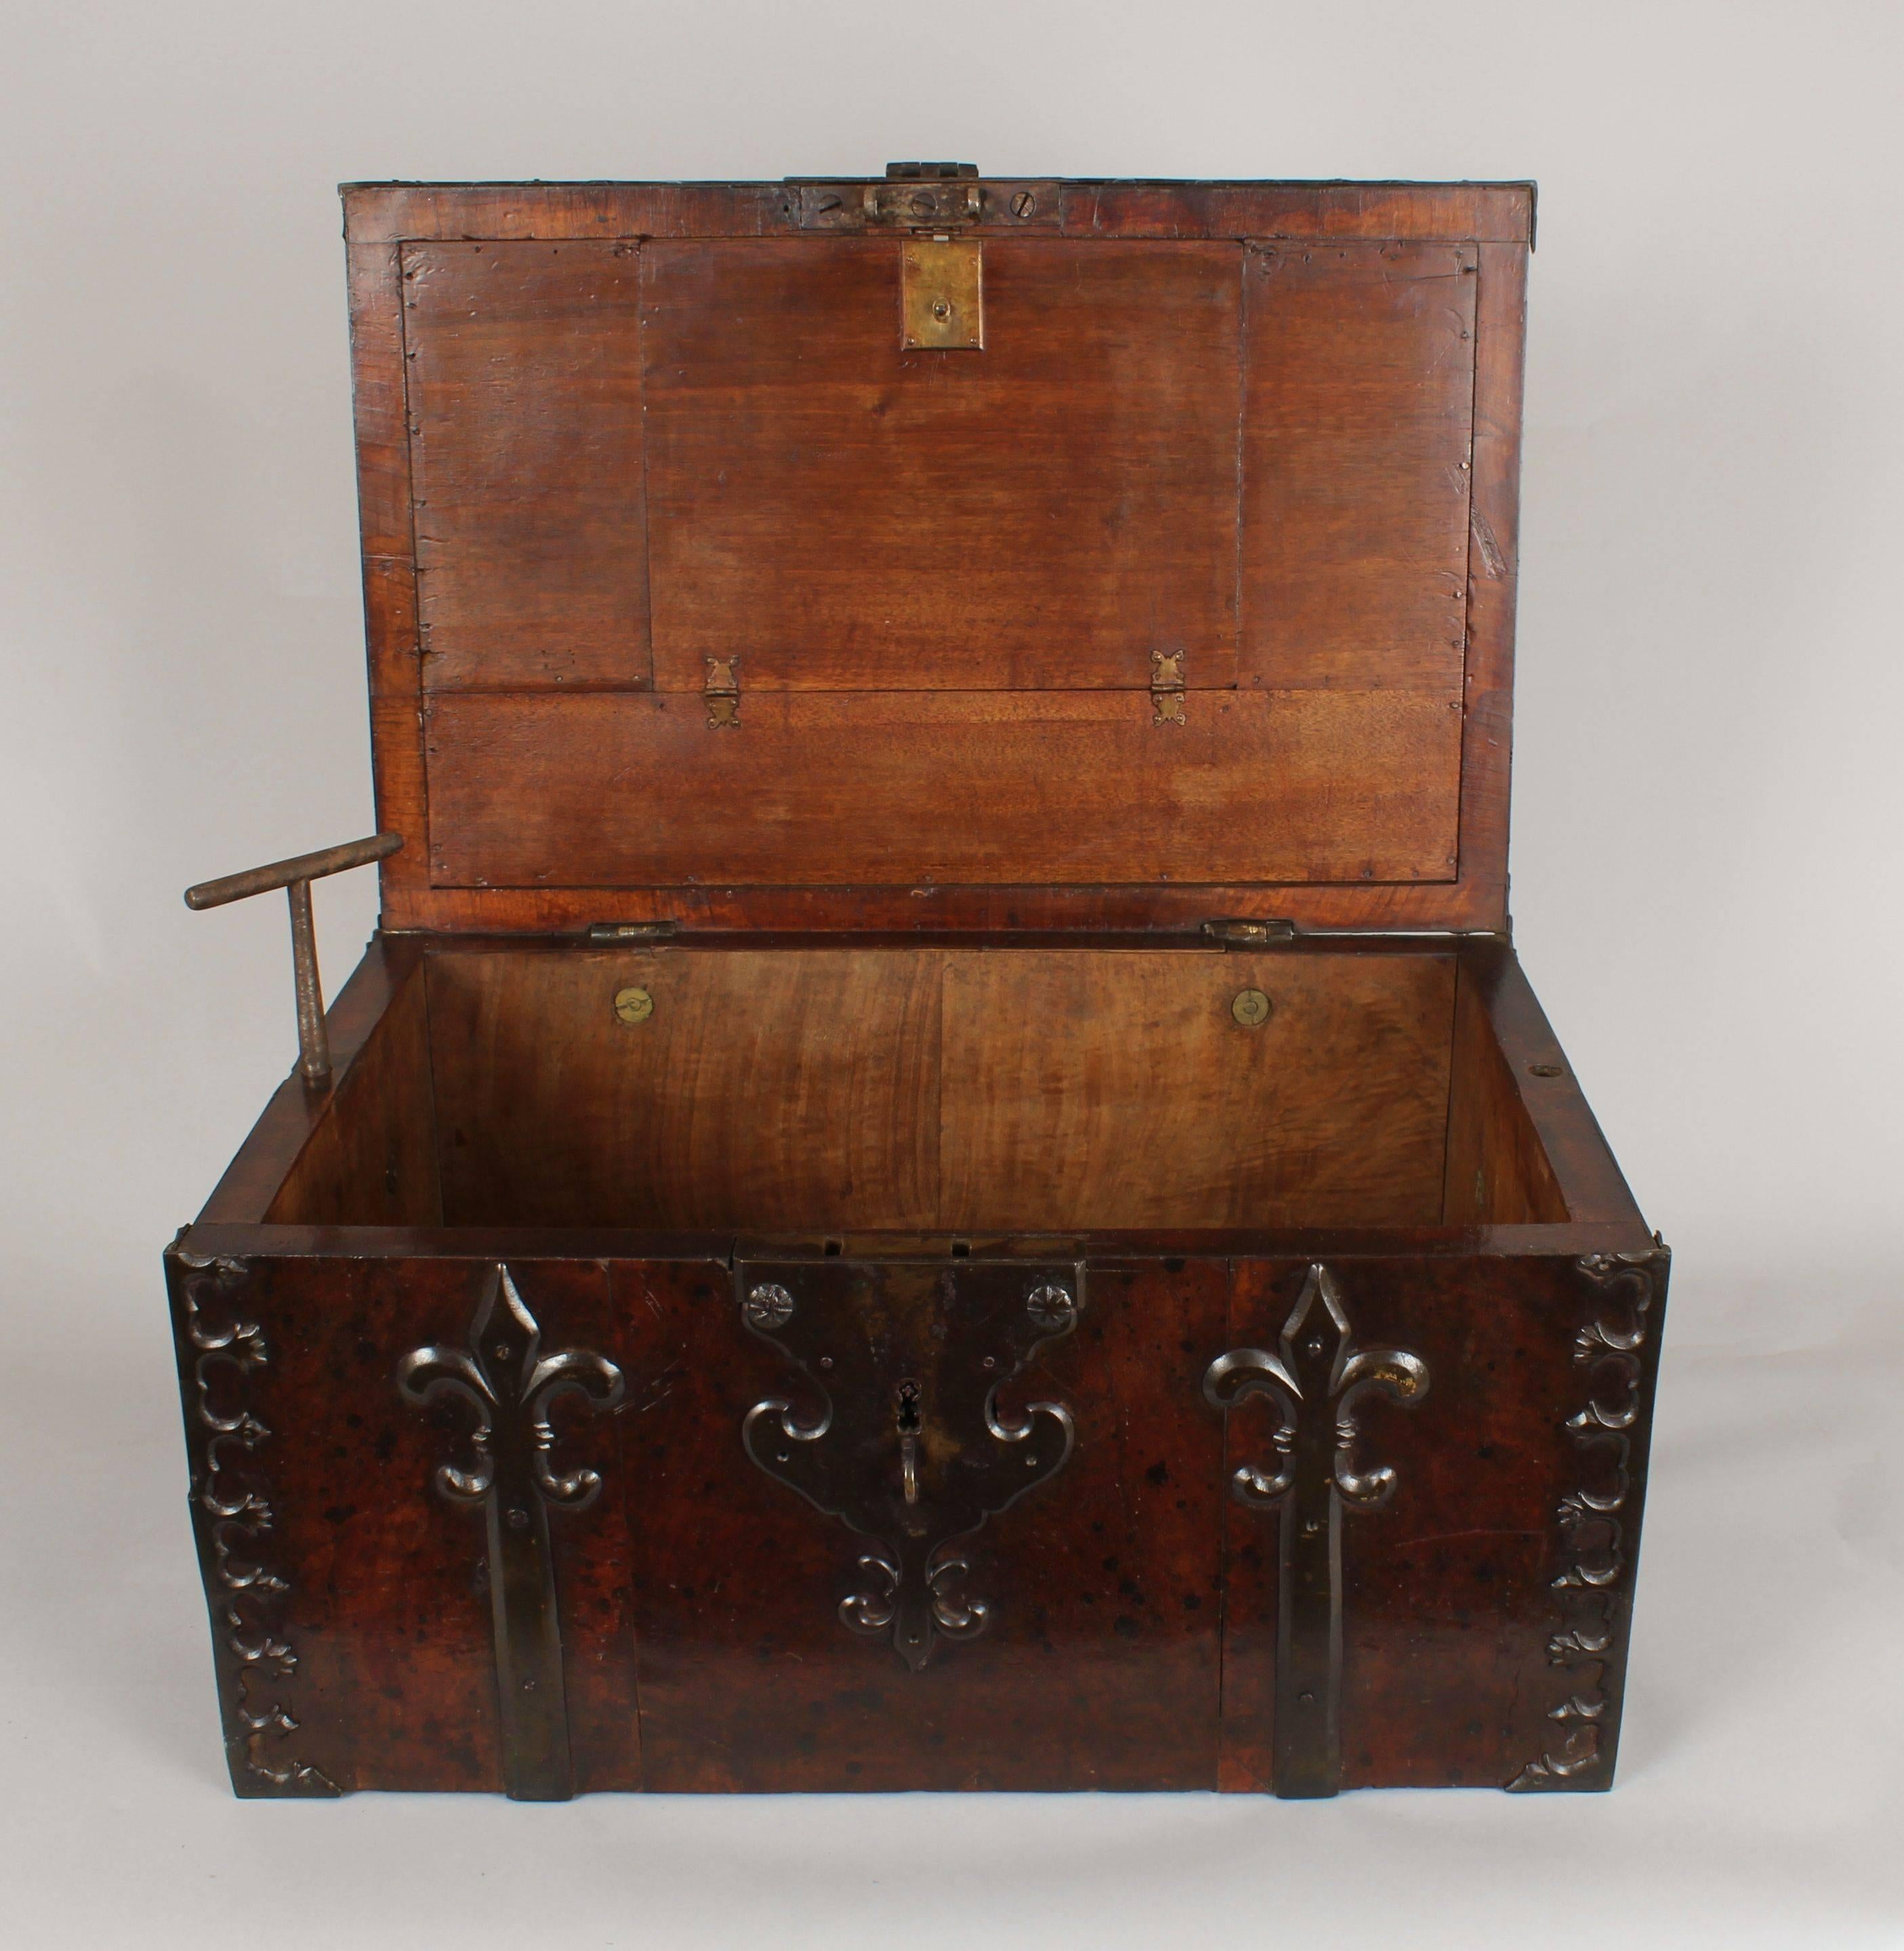 17th century, walnut coffre-fort; the heavily constructed box elaborately mounted with cut-steel straps, handles and hasp; the interior with a compartment within the lid and a pair of screws to enable the box to be secured to the floor or other